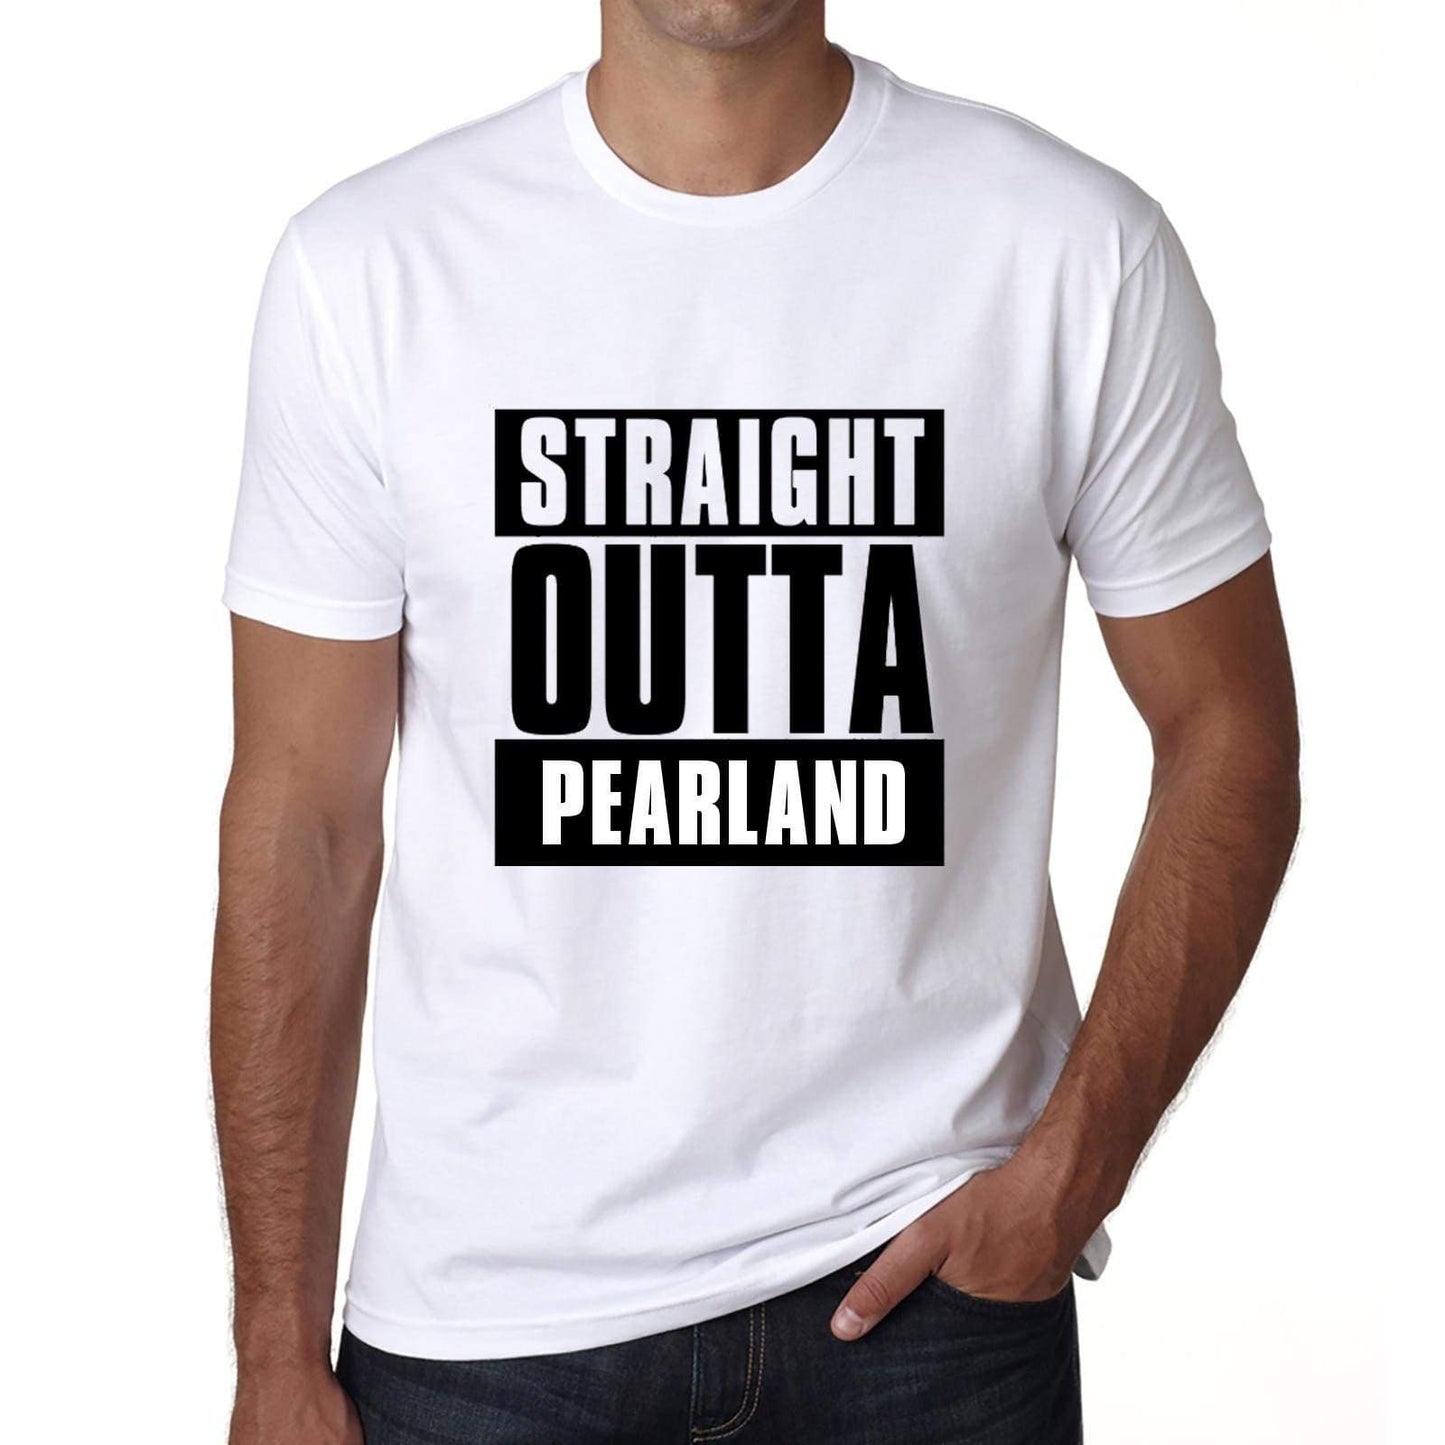 Straight Outta Pearland Mens Short Sleeve Round Neck T-Shirt 00027 - White / S - Casual